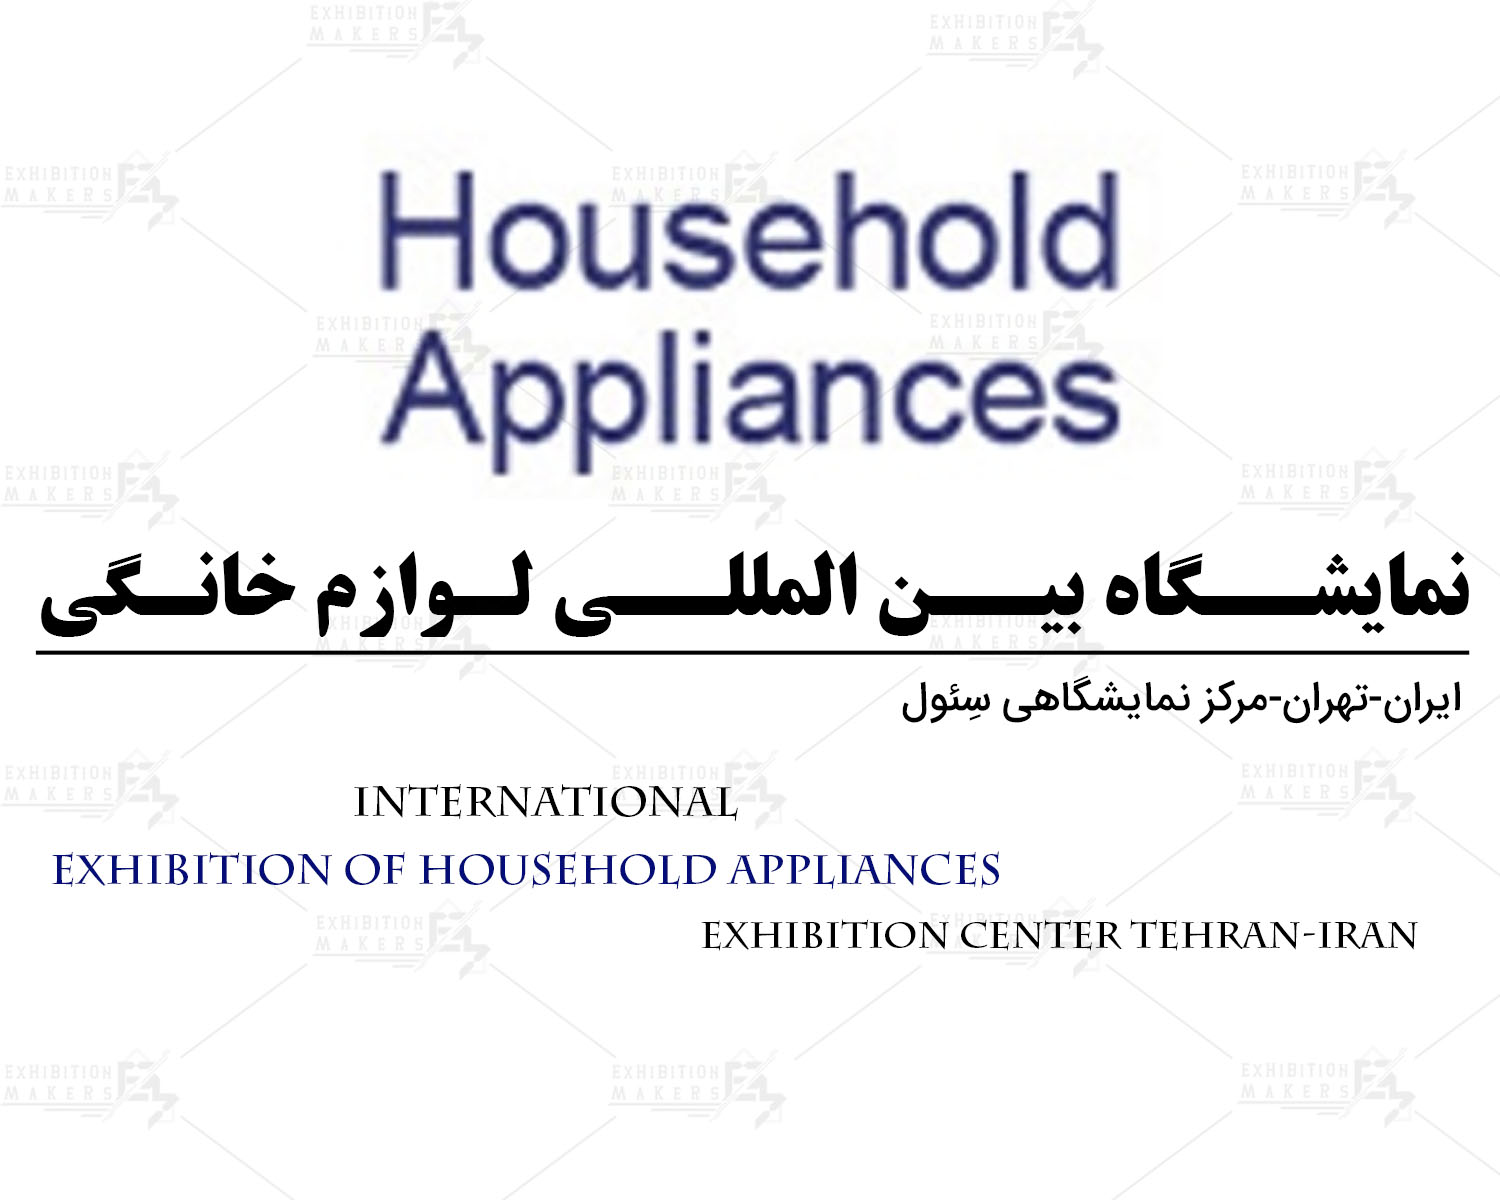 The Tehran Exhibition of Household Appliances